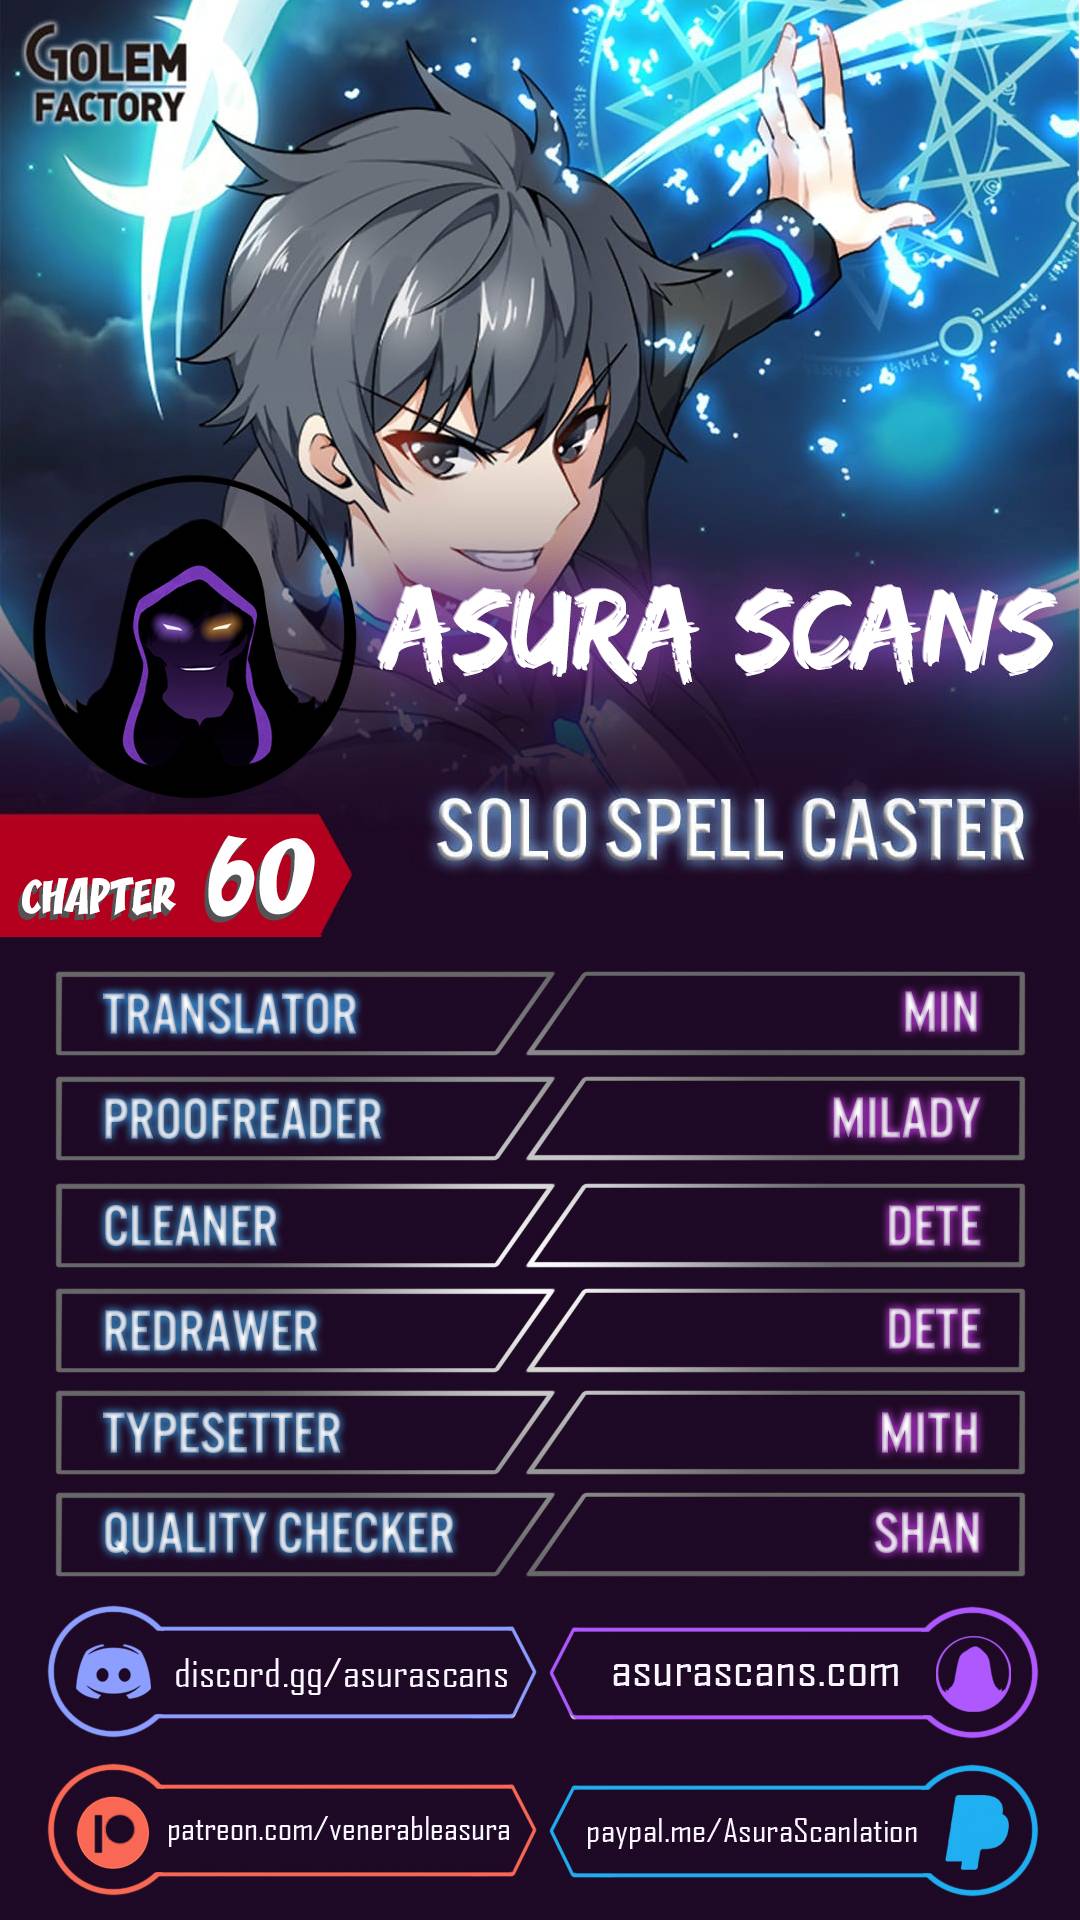 Solo Spell Caster Chapter 60